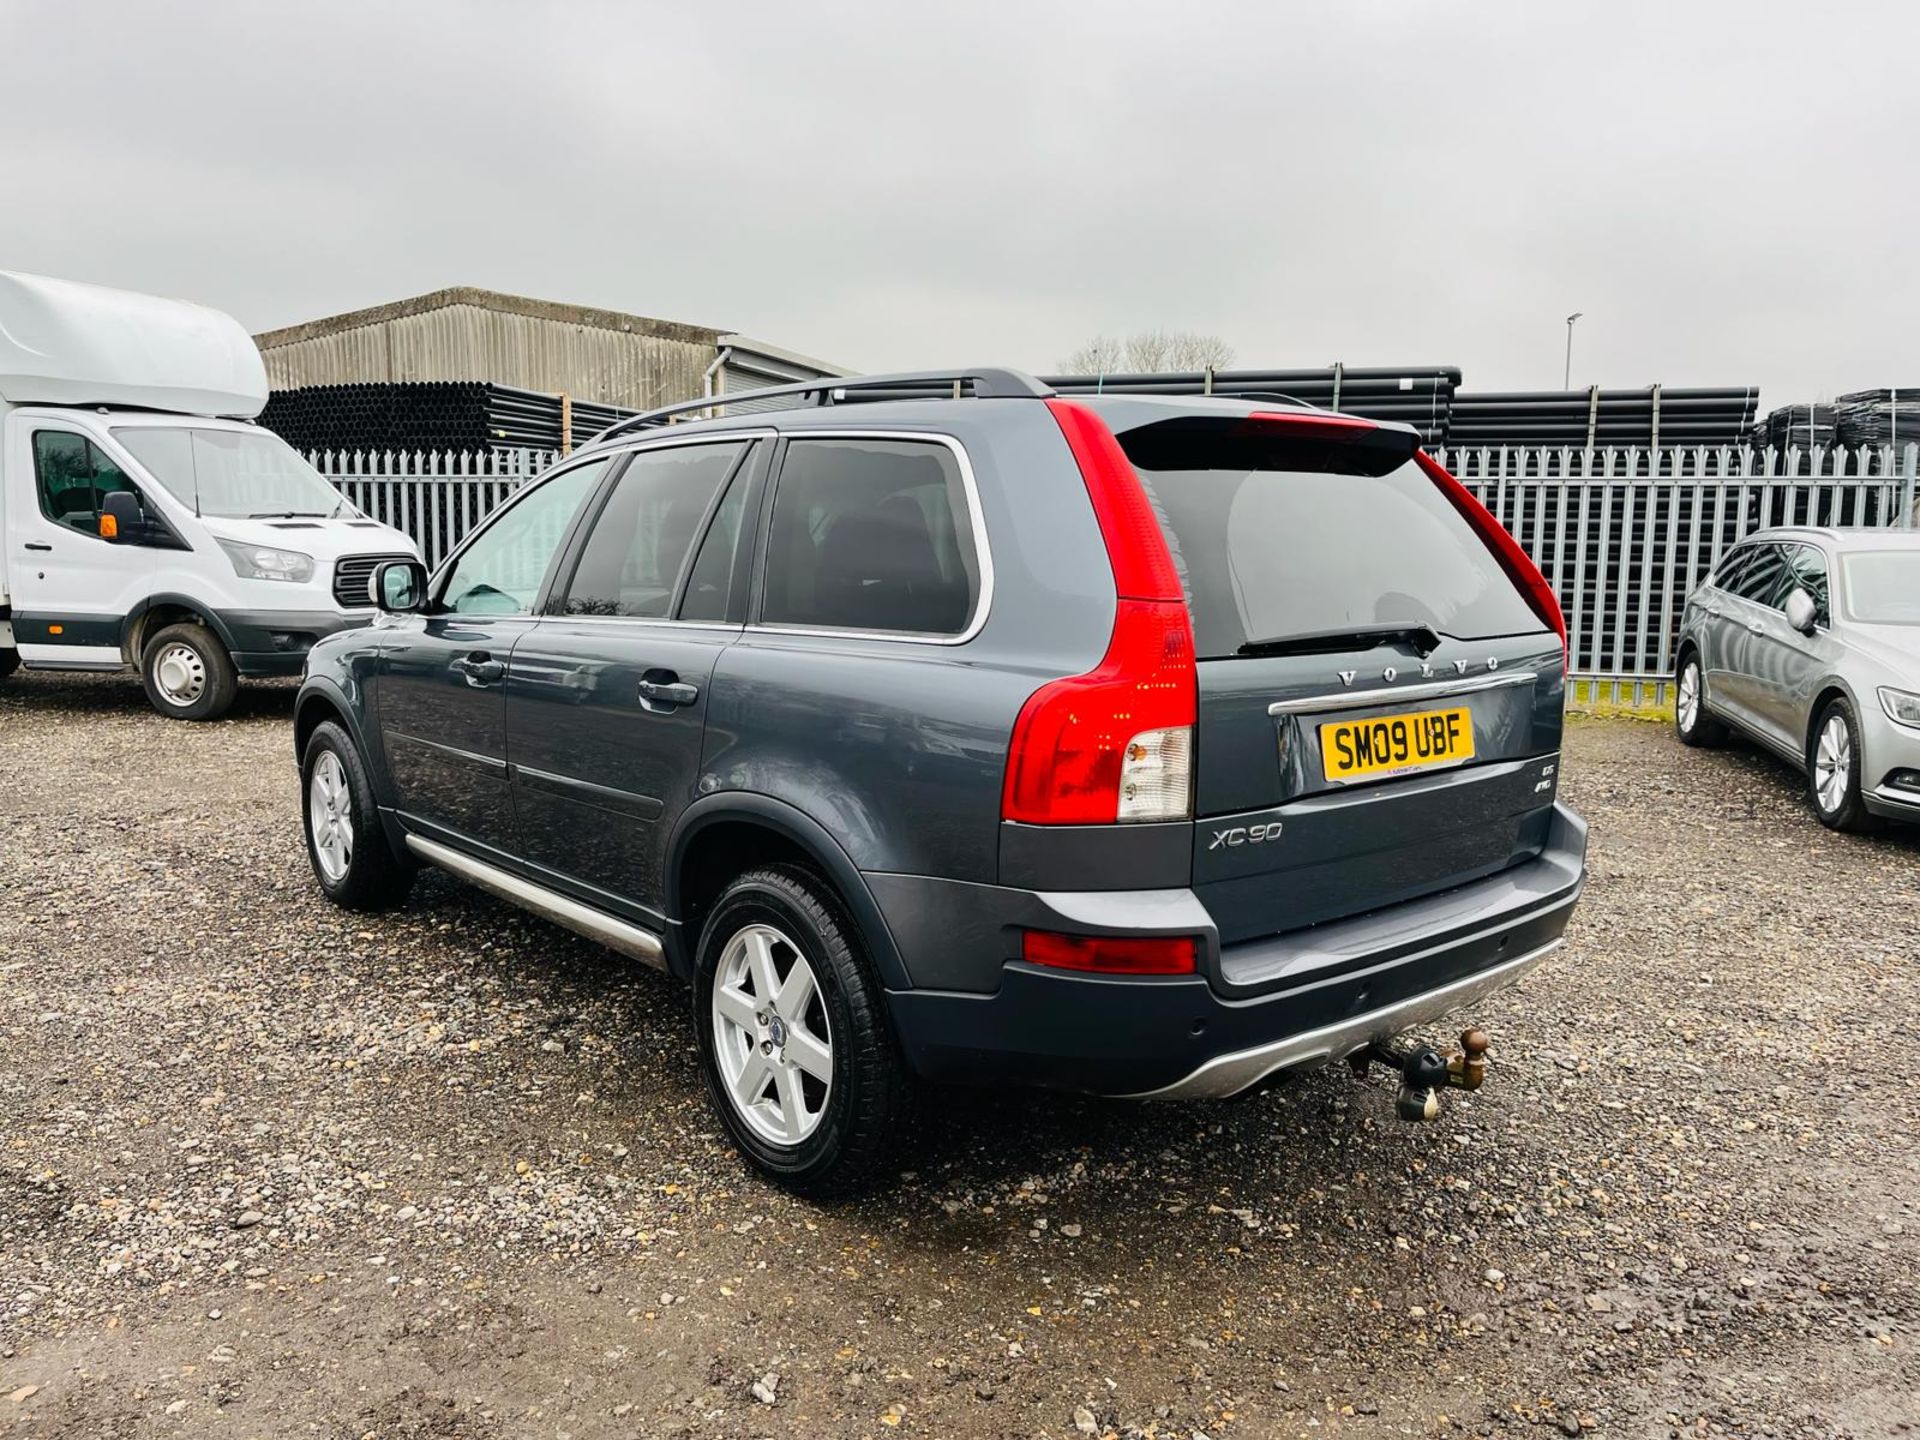 ** ON SALE ** Volvo Xc90 Active Automatic D5 185 Geartronic -Air Conditioning-Bluetooth Handsfree - Image 5 of 36